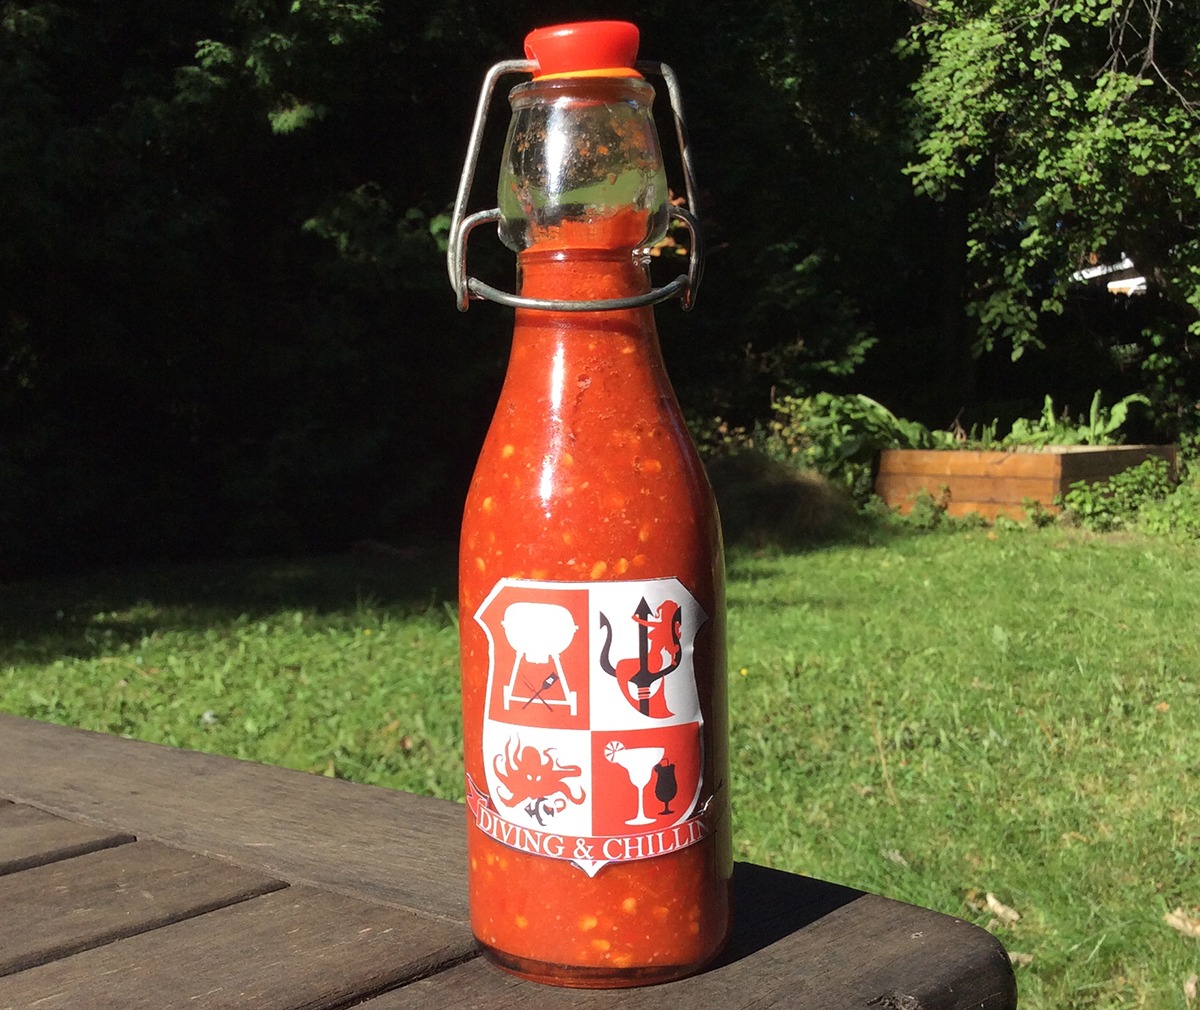 First edition of the Diving and Chillin' hot sauce.